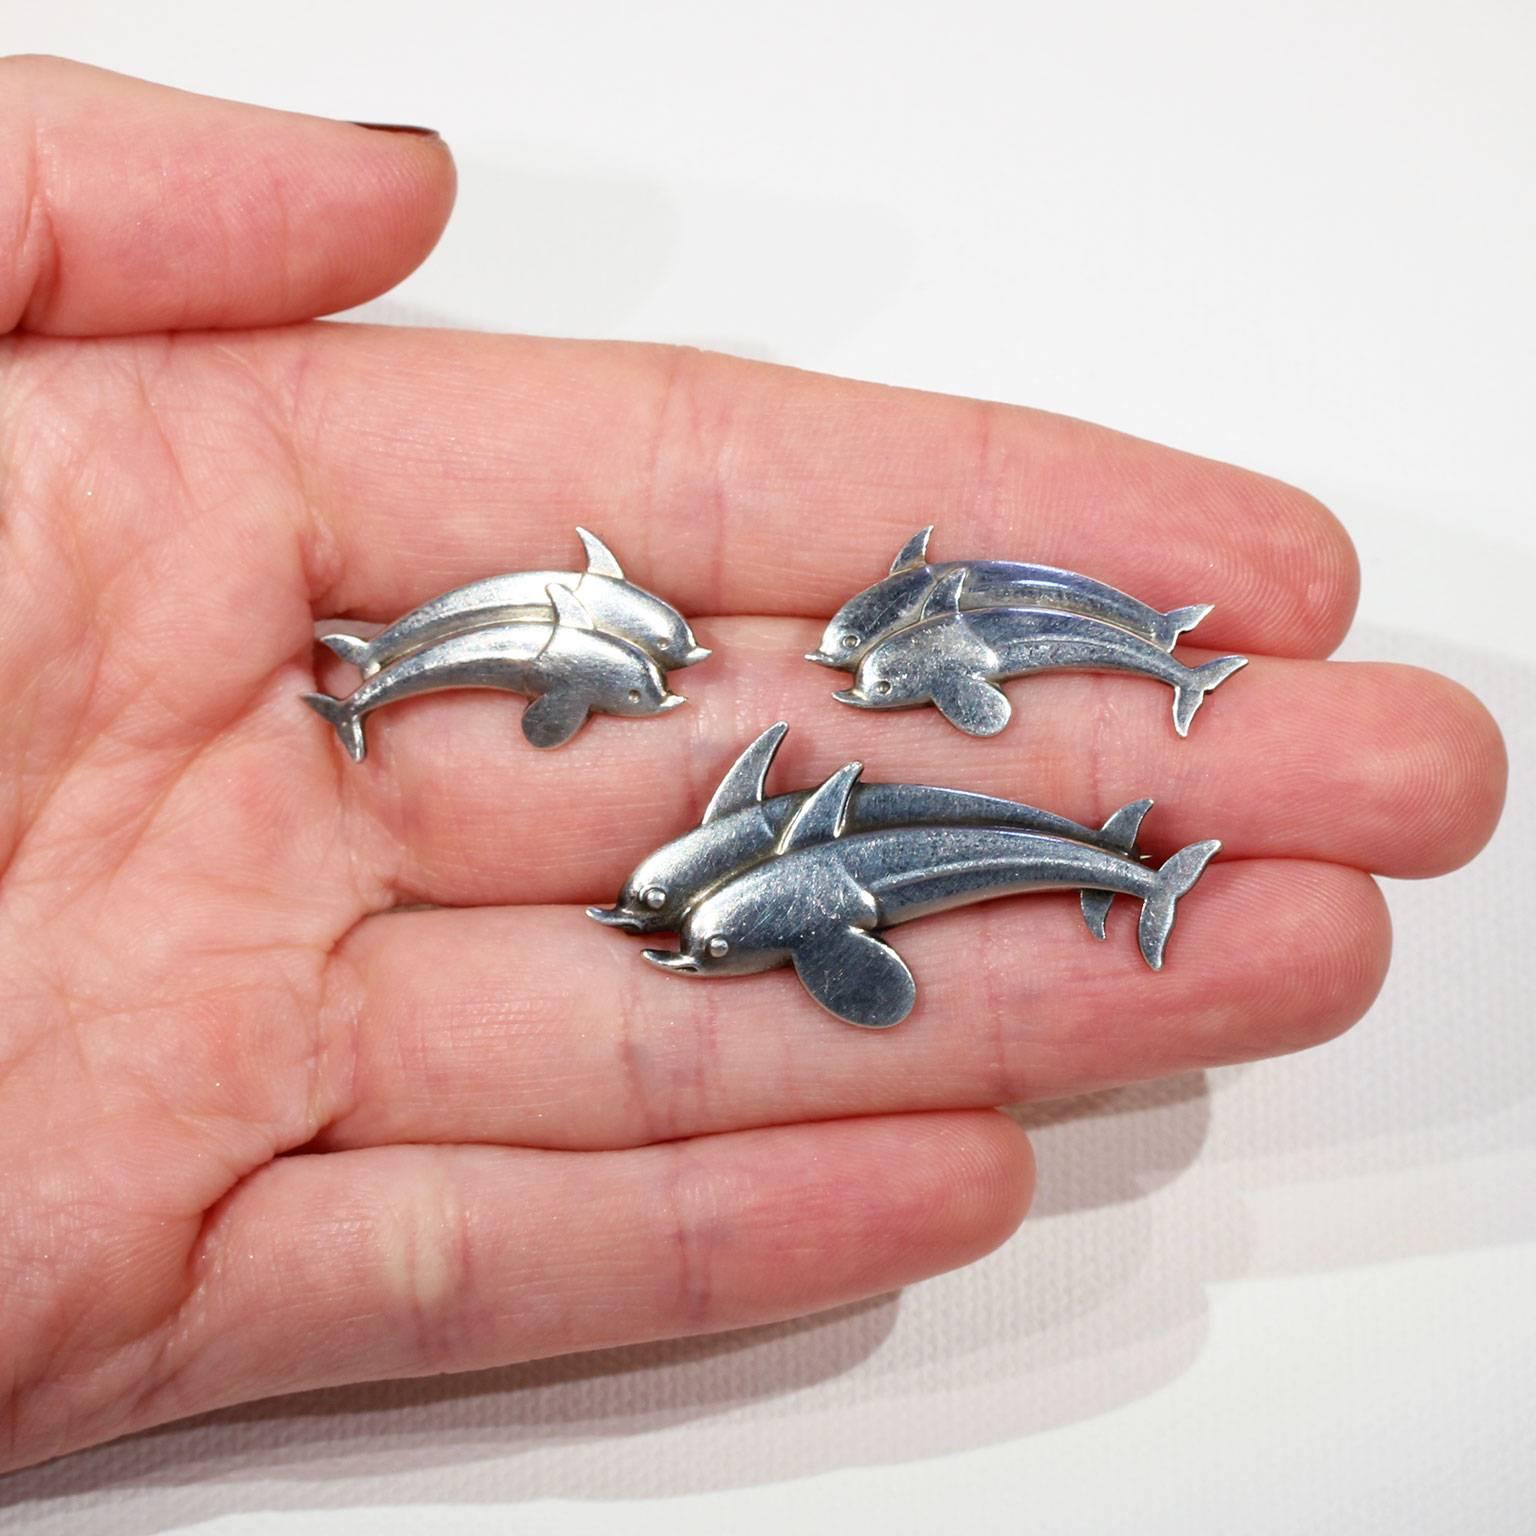 This vintage Georg Jensen dolphin brooch and earring set was handcrafted in Denmark around 1950. This Mid-Century set was made in sterling silver and features an adorable double dolphin motif. All three pieces together weigh 10.8 grams. The brooch